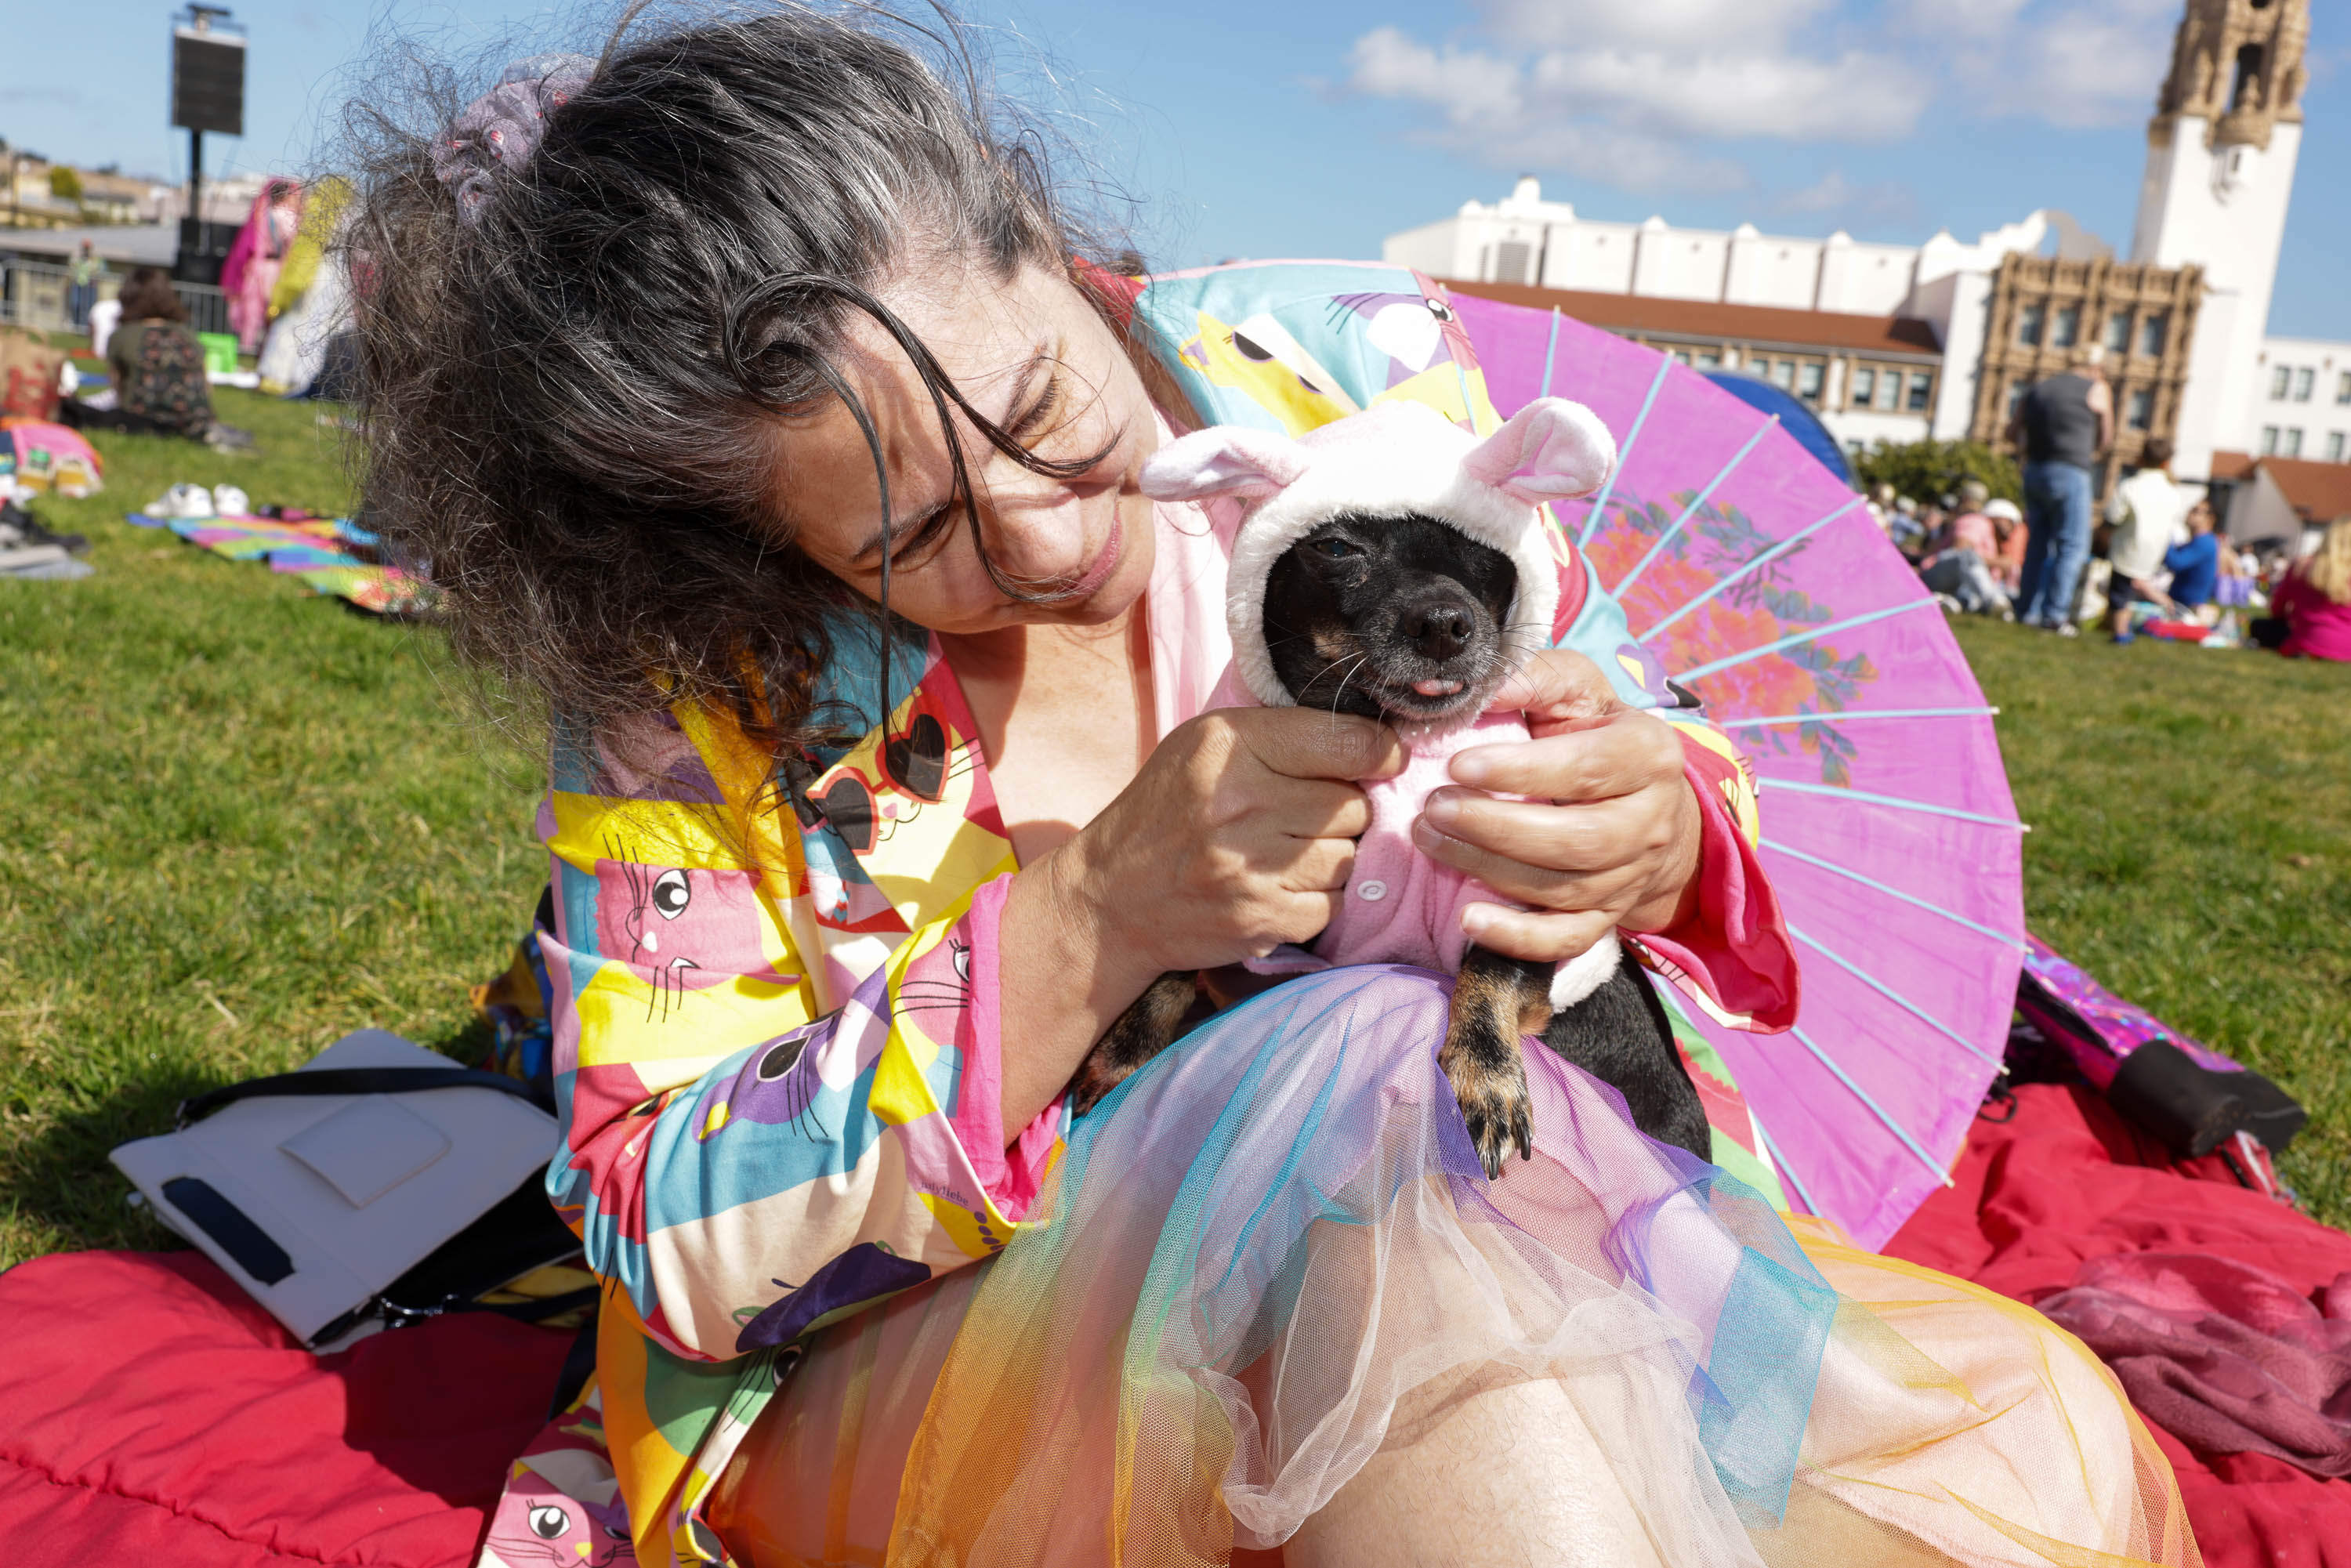 A woman in colorful attire cuddles a dog in a pink outfit and hat, with a pink fan behind them, outdoors on a sunny day.